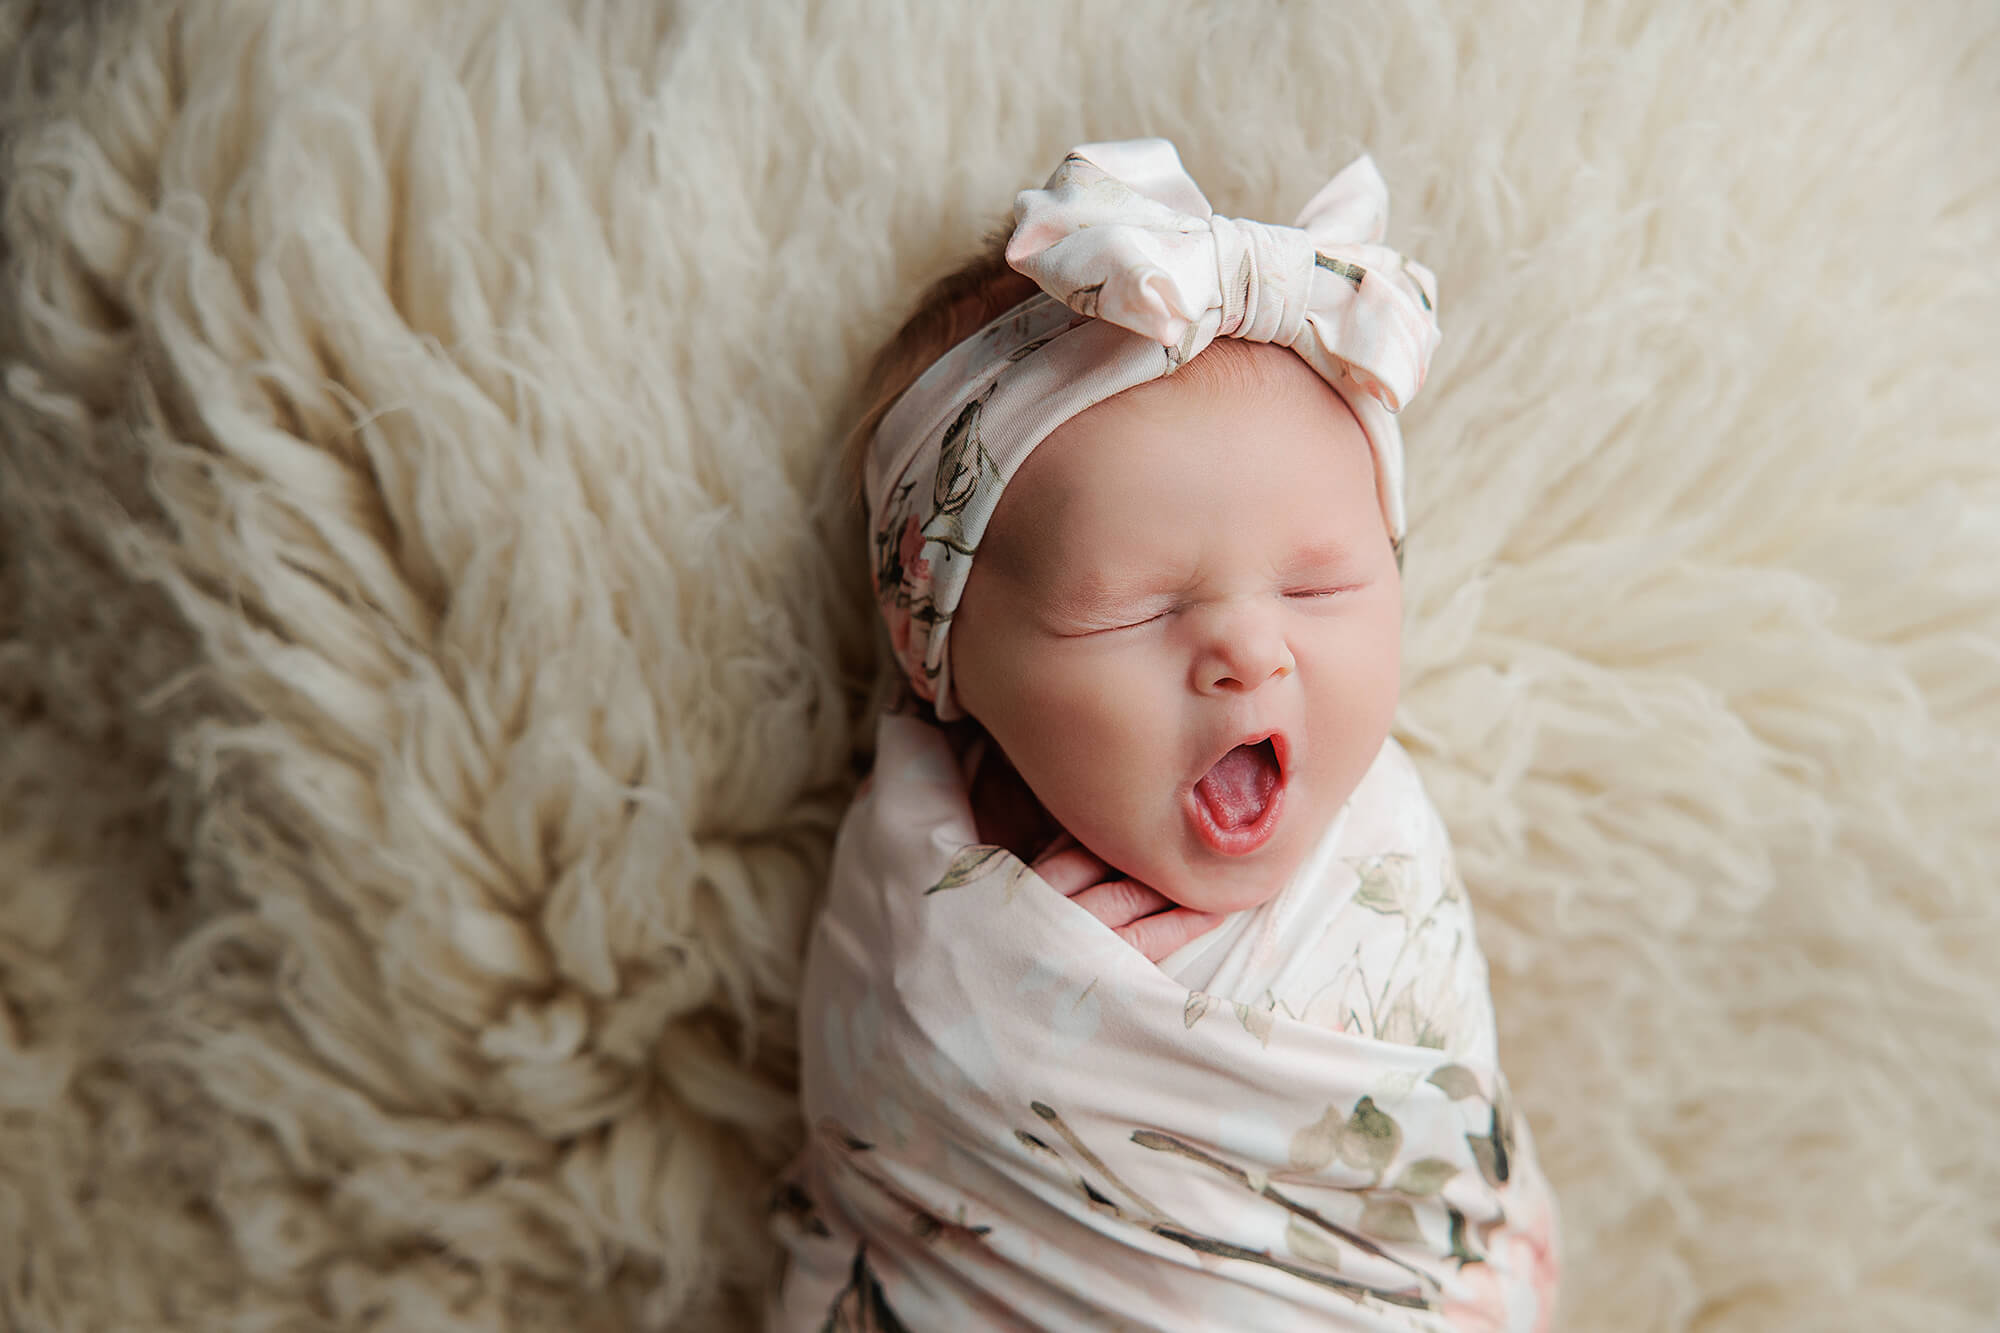 Newborn girl yawning and wrapped in floral for her newborn photography session that was booked early.